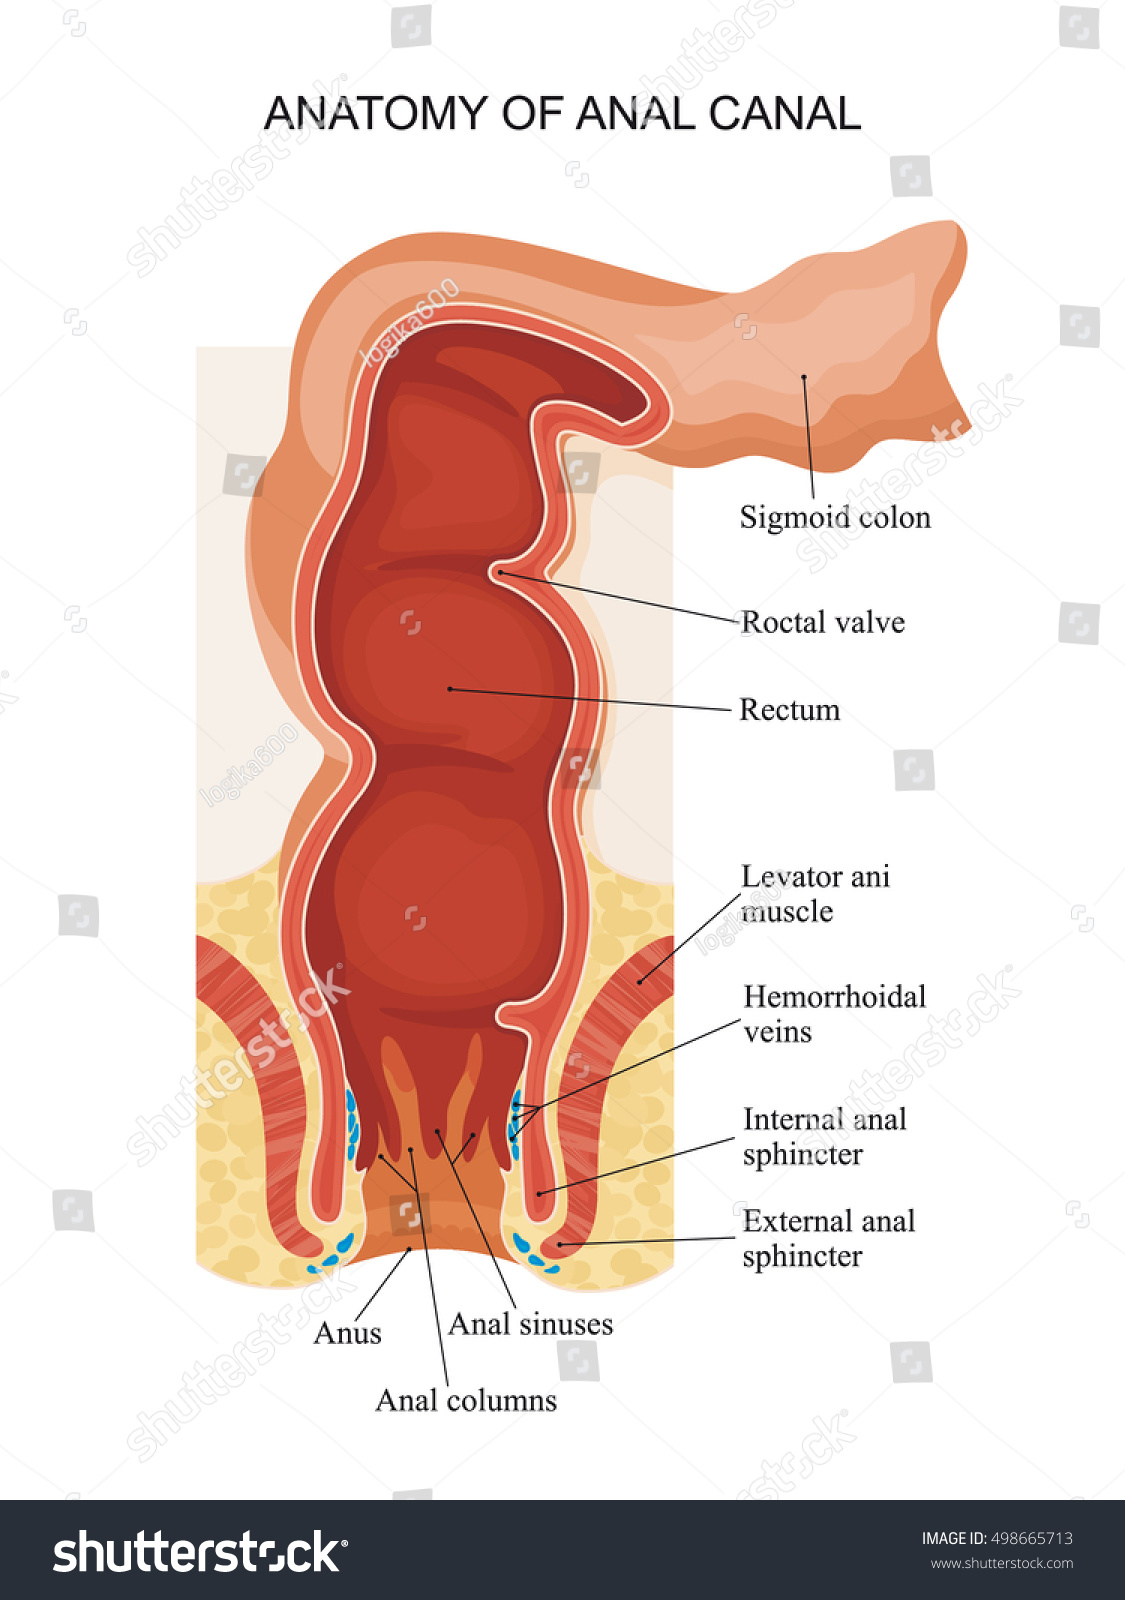 Anatomy Anal Canal Stock Vector Royalty Free 498665713 Shutterstock